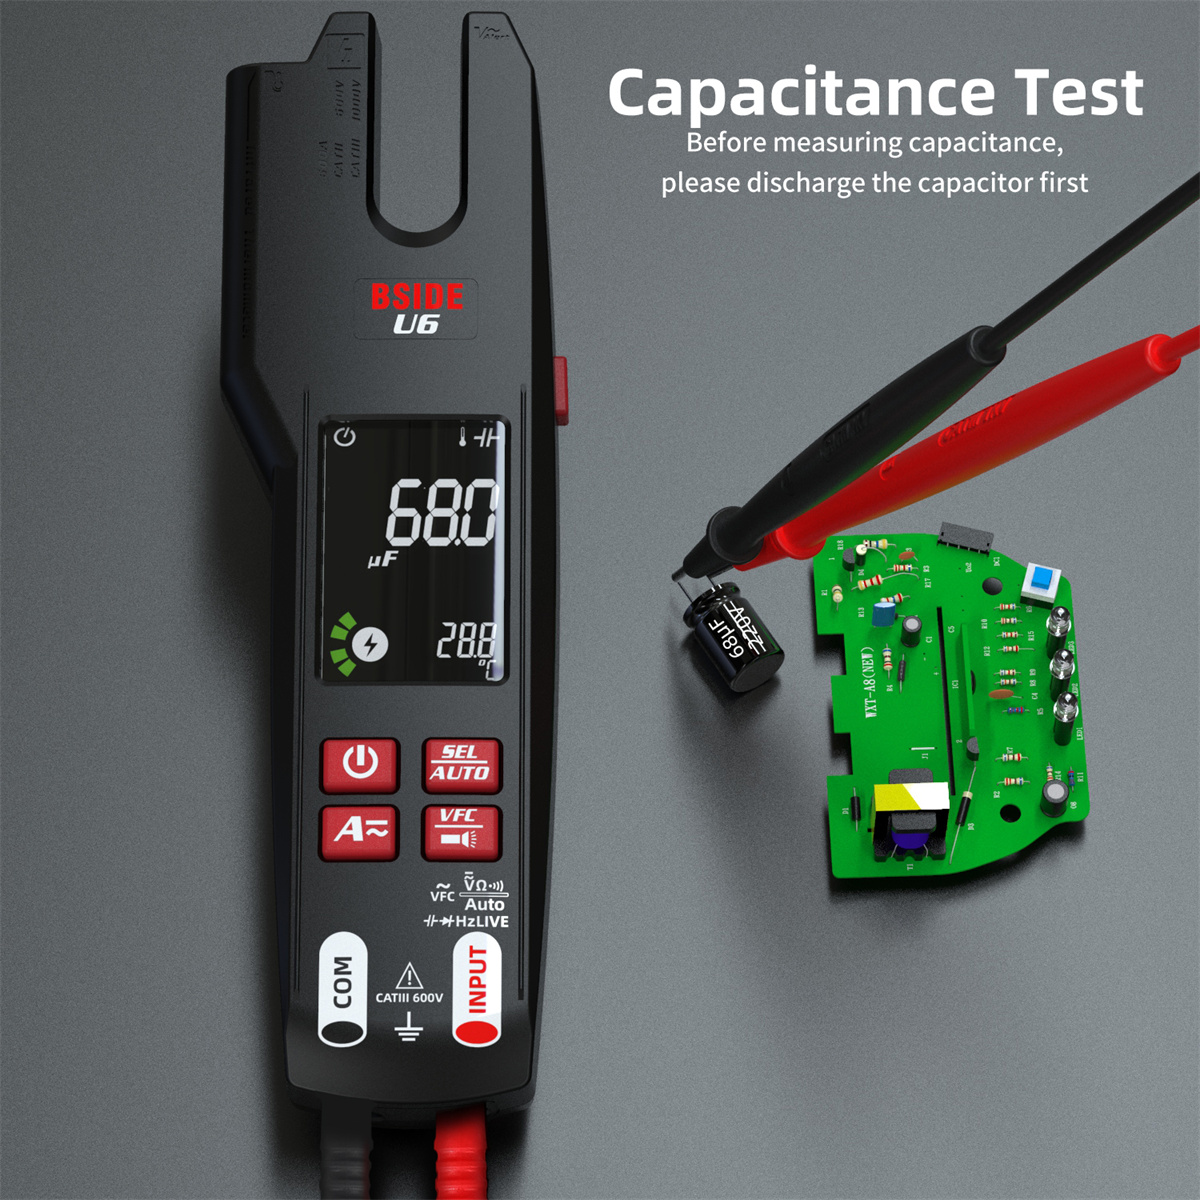 BSIDE U6 Digital Clamp Fork Multimeter AC/DC Voltage Current Tester with Infrared Temperature Measurement & Safety Features